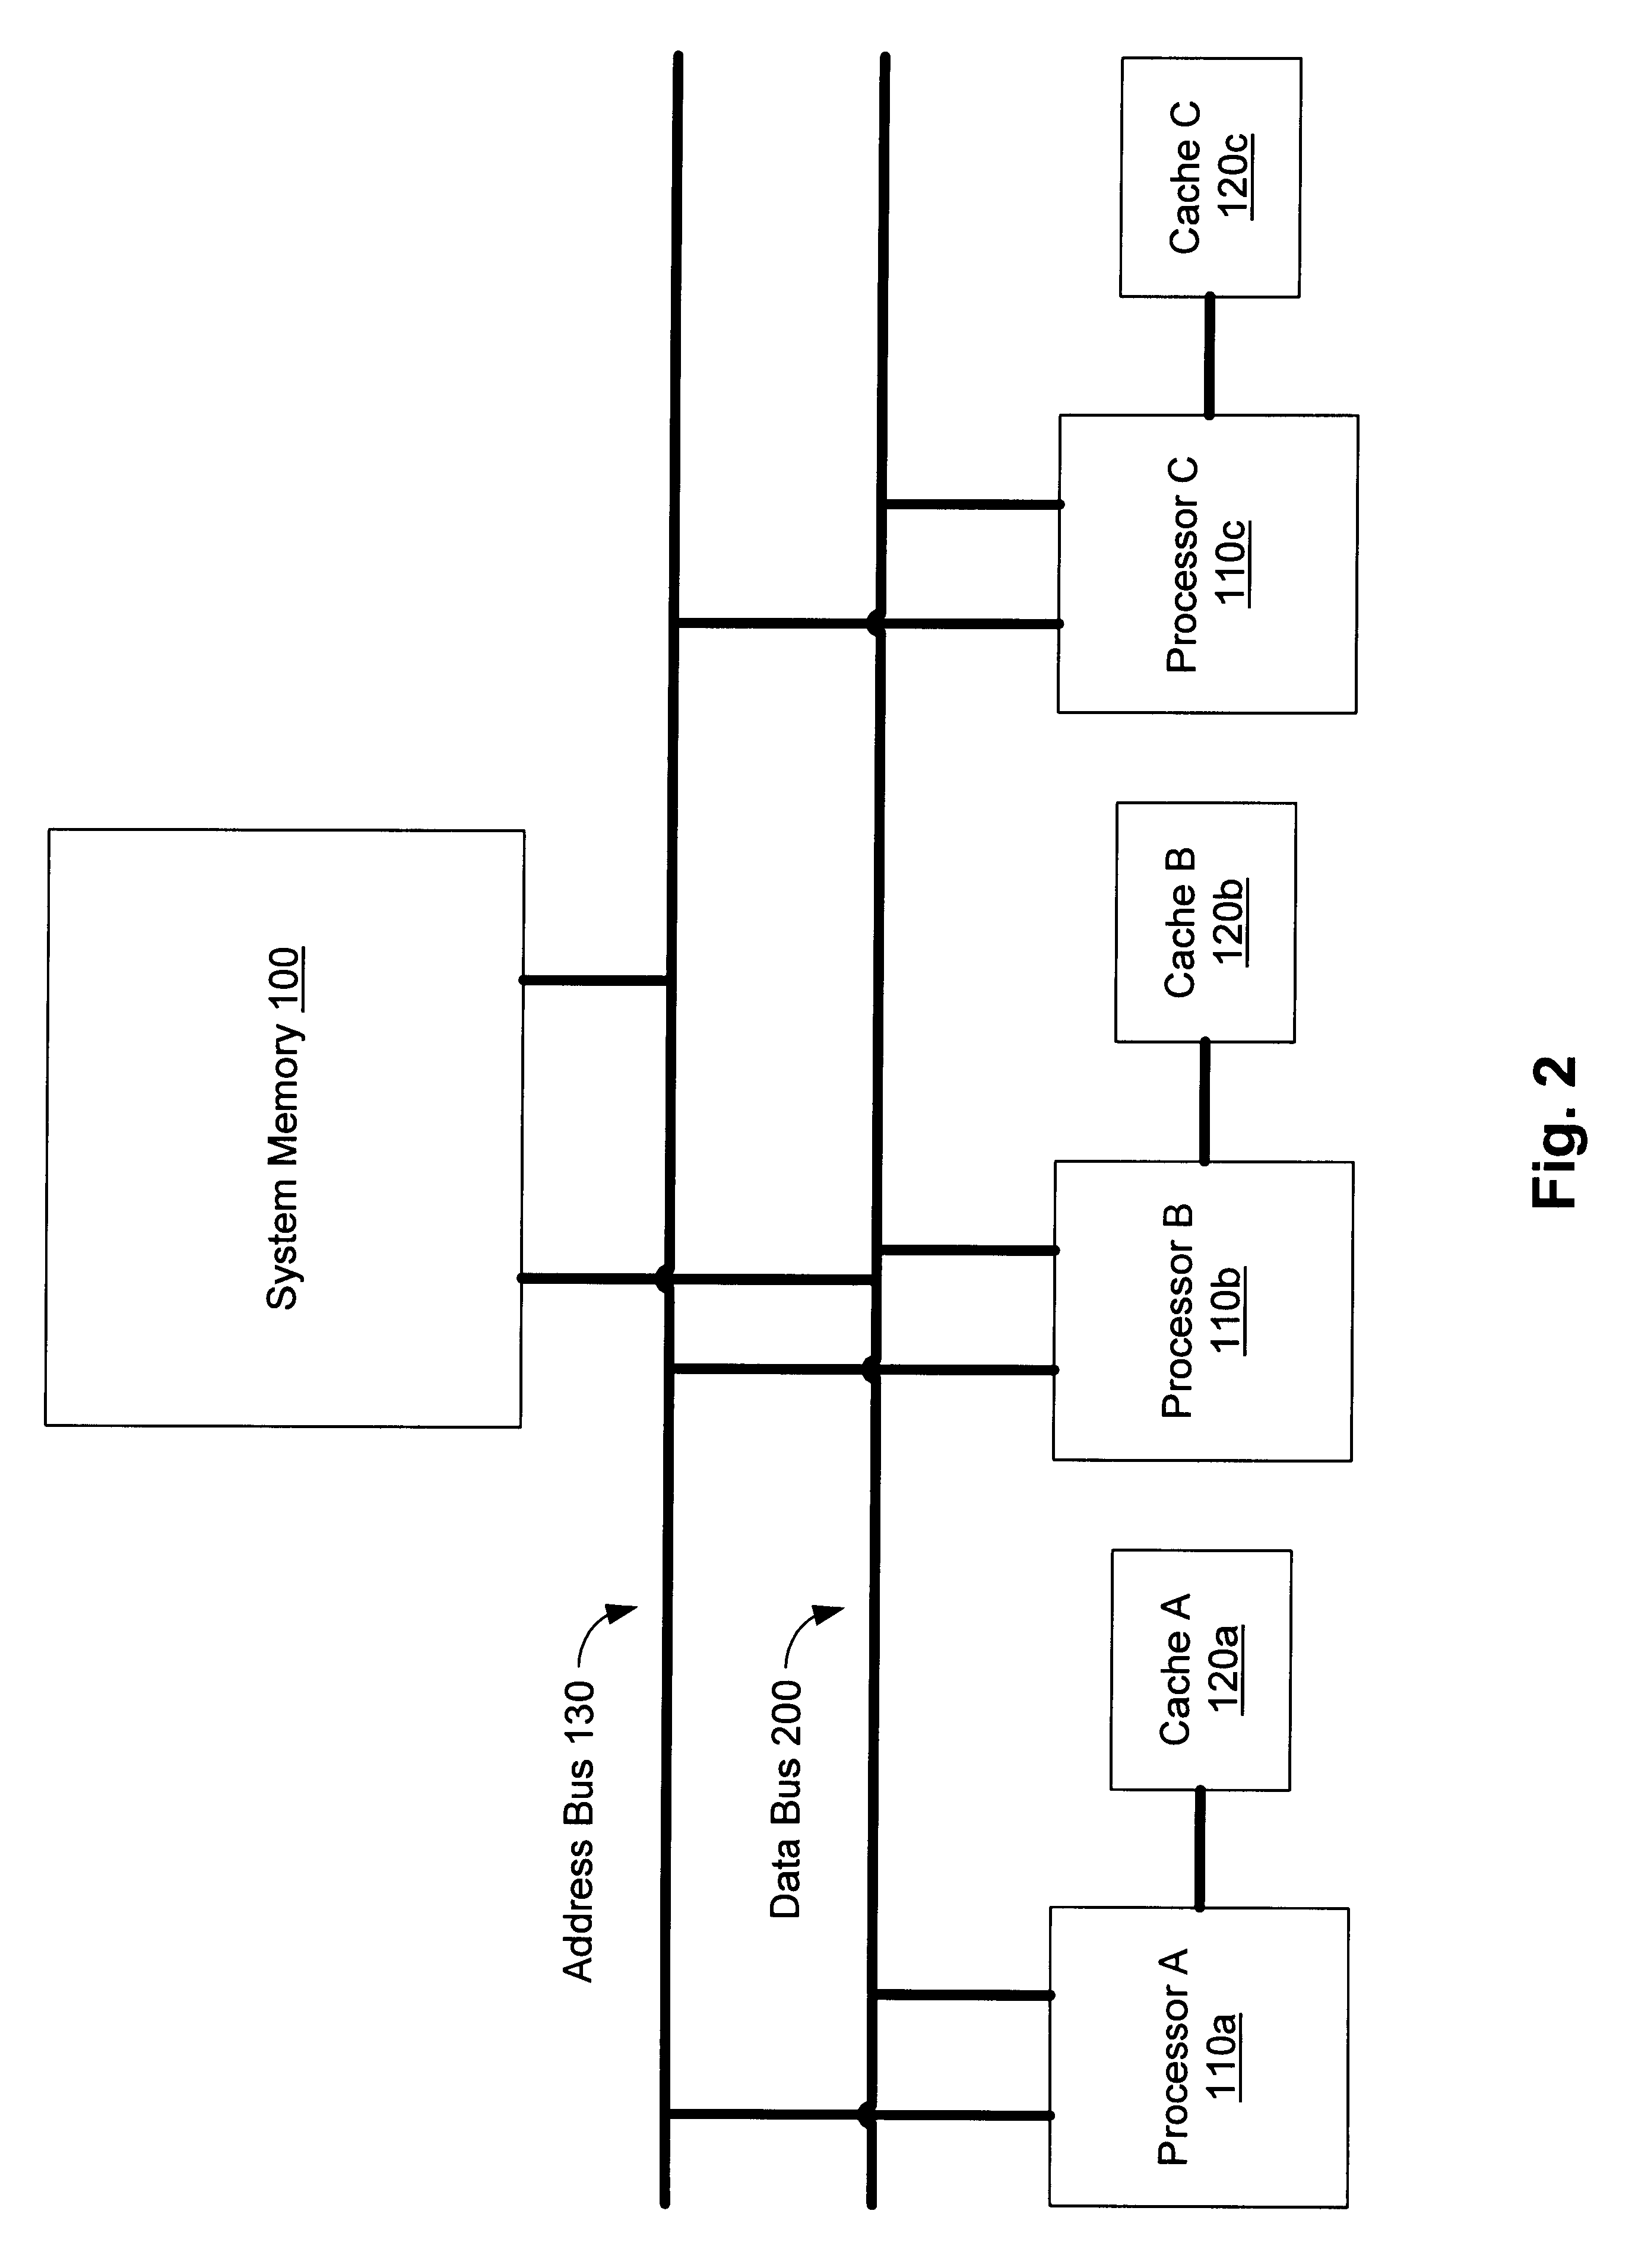 Mechanism for reordering transactions in computer systems with snoop-based cache consistency protocols